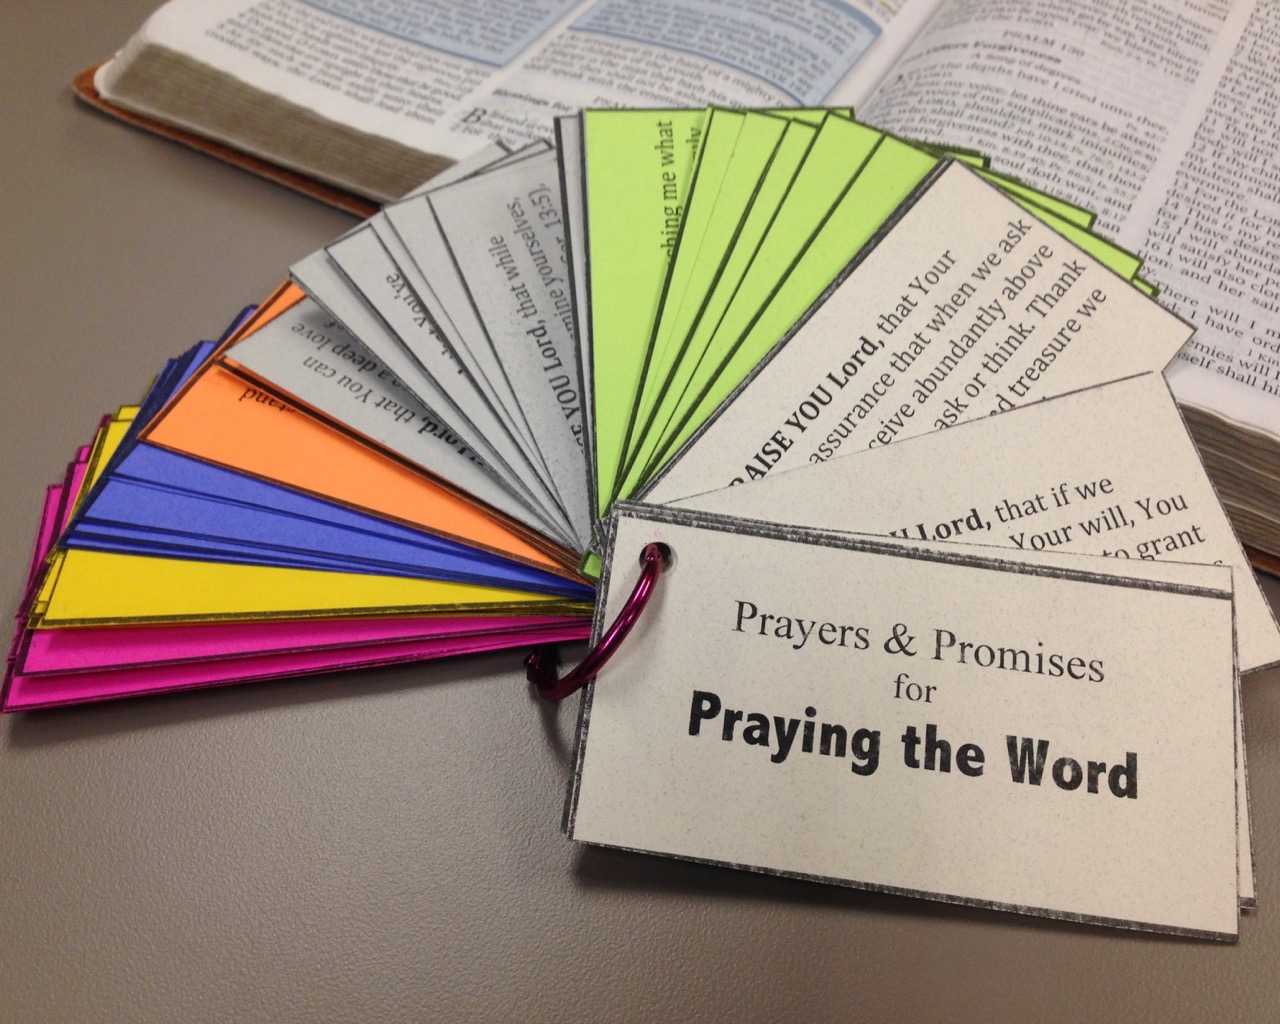 Praying The Word: Prayer & Promise Cards | Revival & Reformation Regarding Prayer Card Template For Word